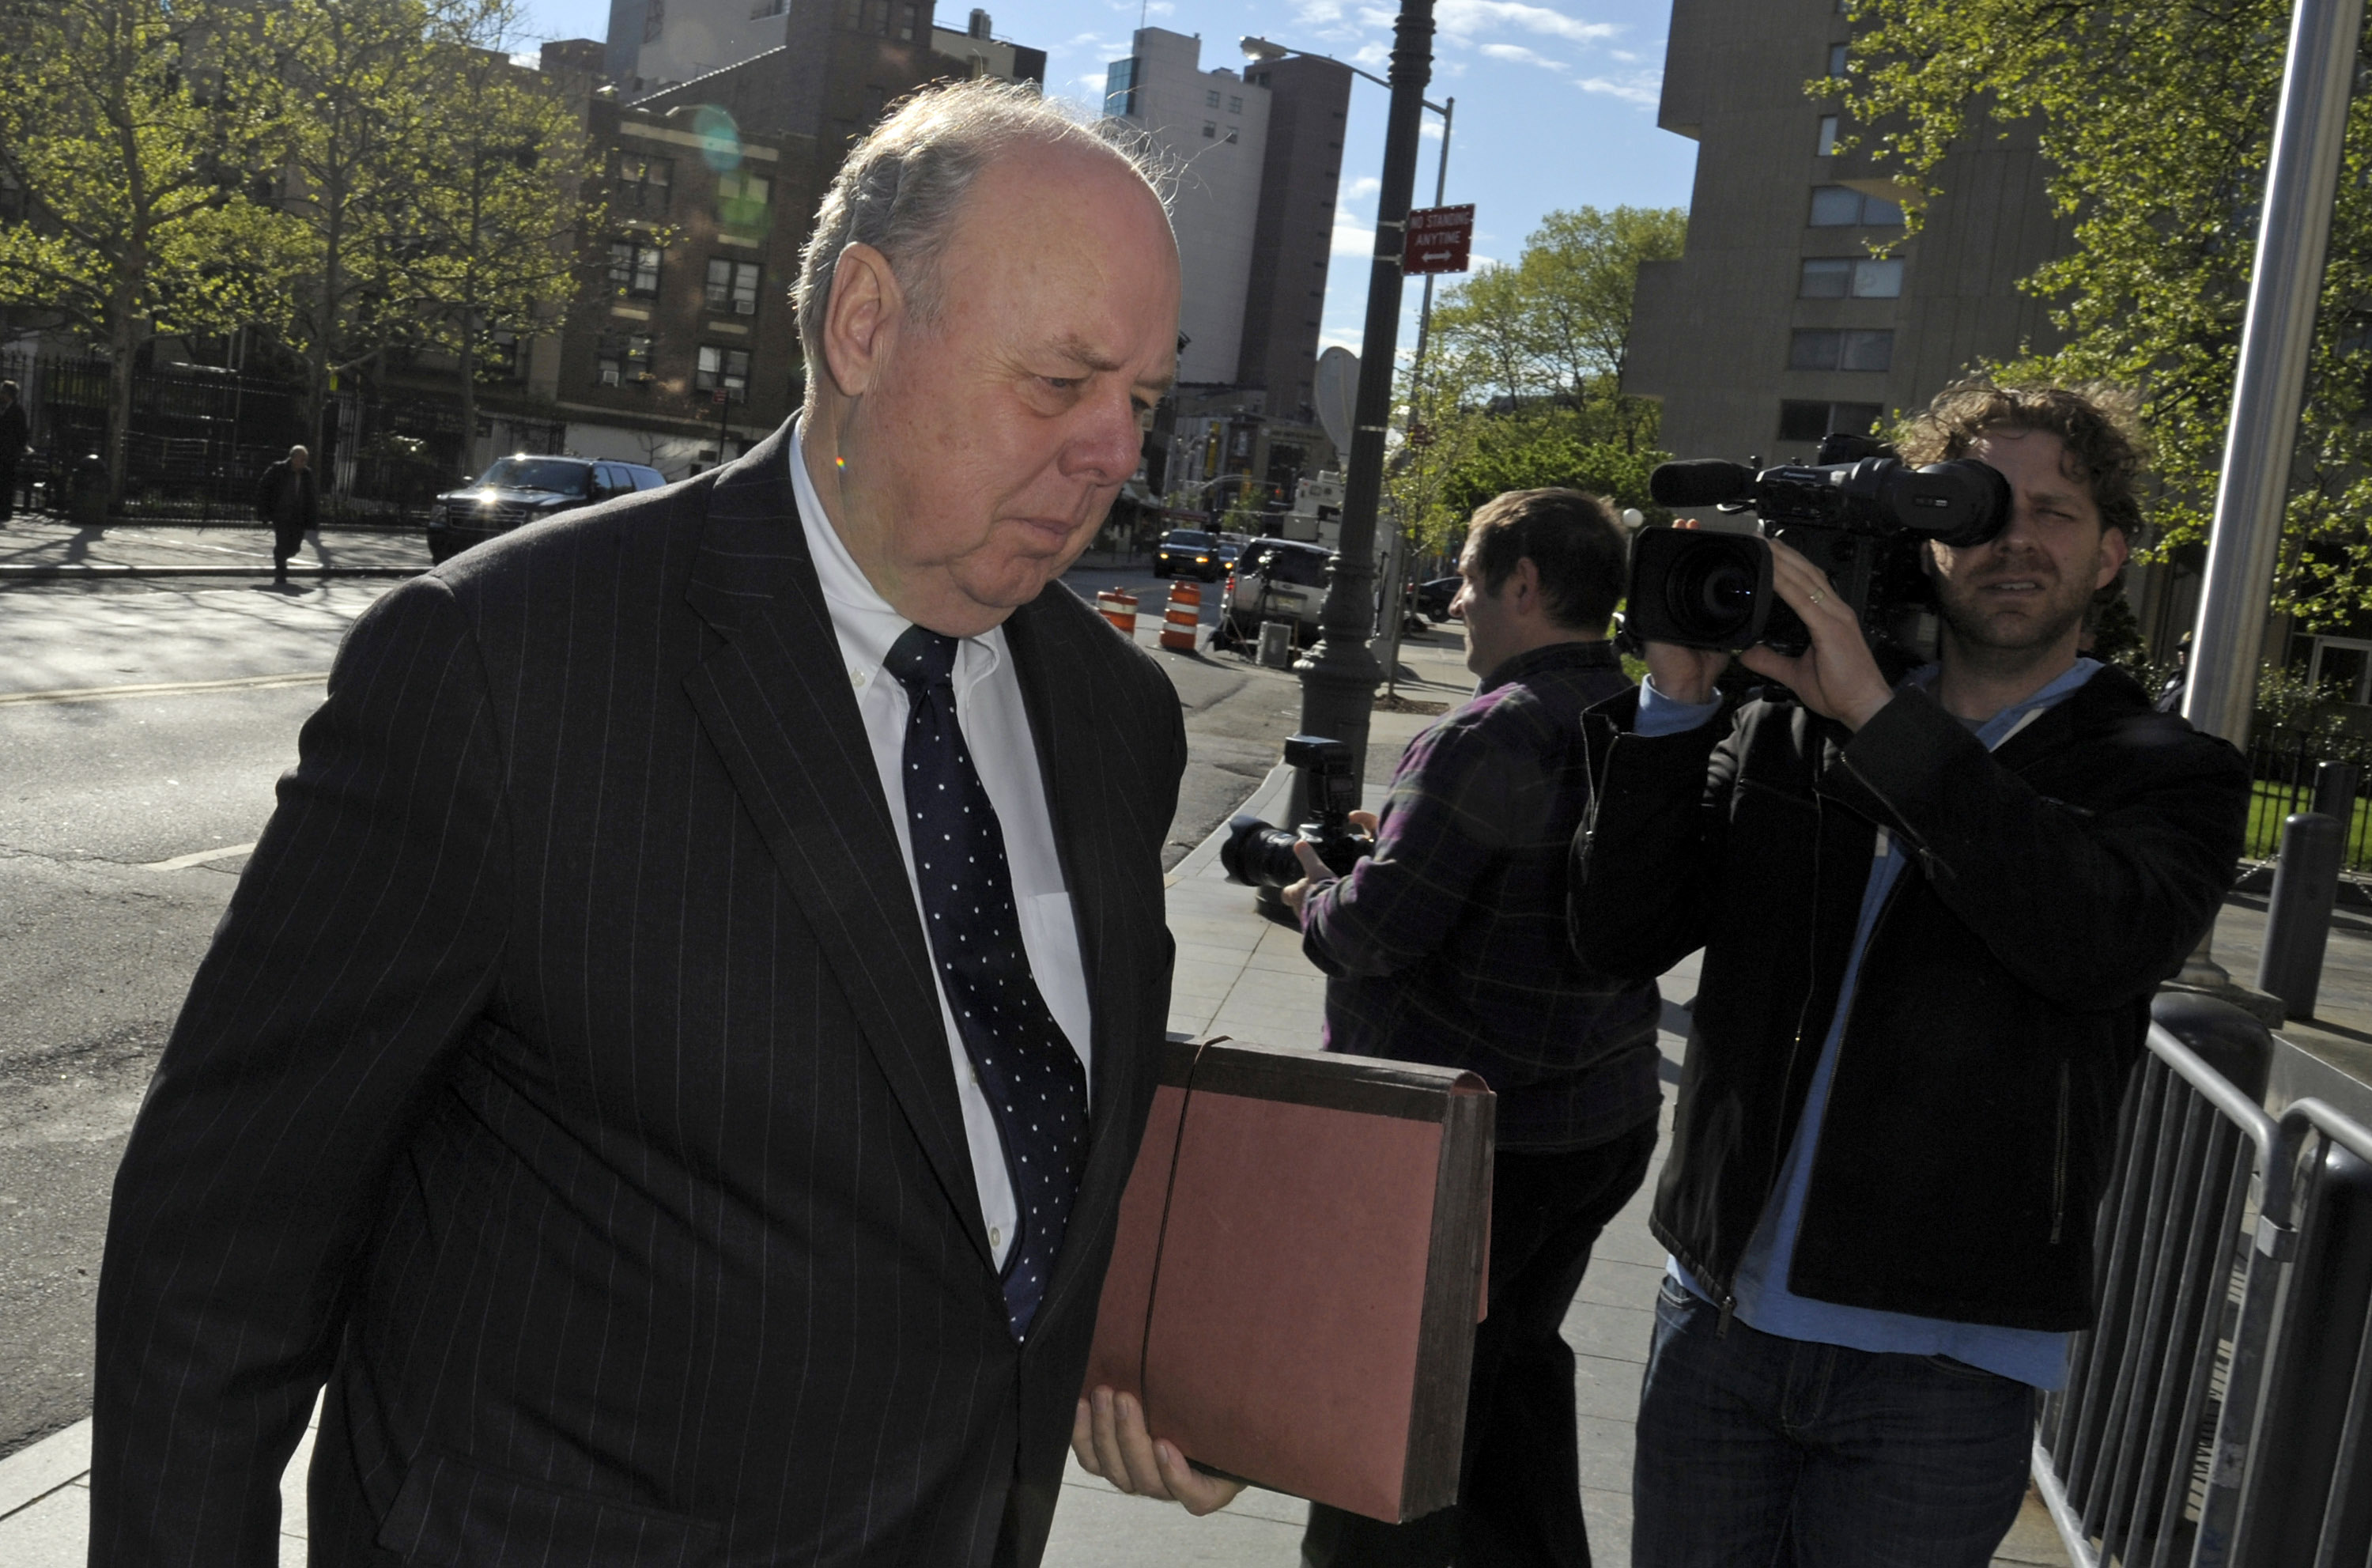 John Dowd, lead attorney for Raj Rajaratnam, co-founder of Galleon Group LLC, enters federal court  in New York, U.S., on Thursday, May 5, 2011. (Bloomberg—Bloomberg via Getty Images)